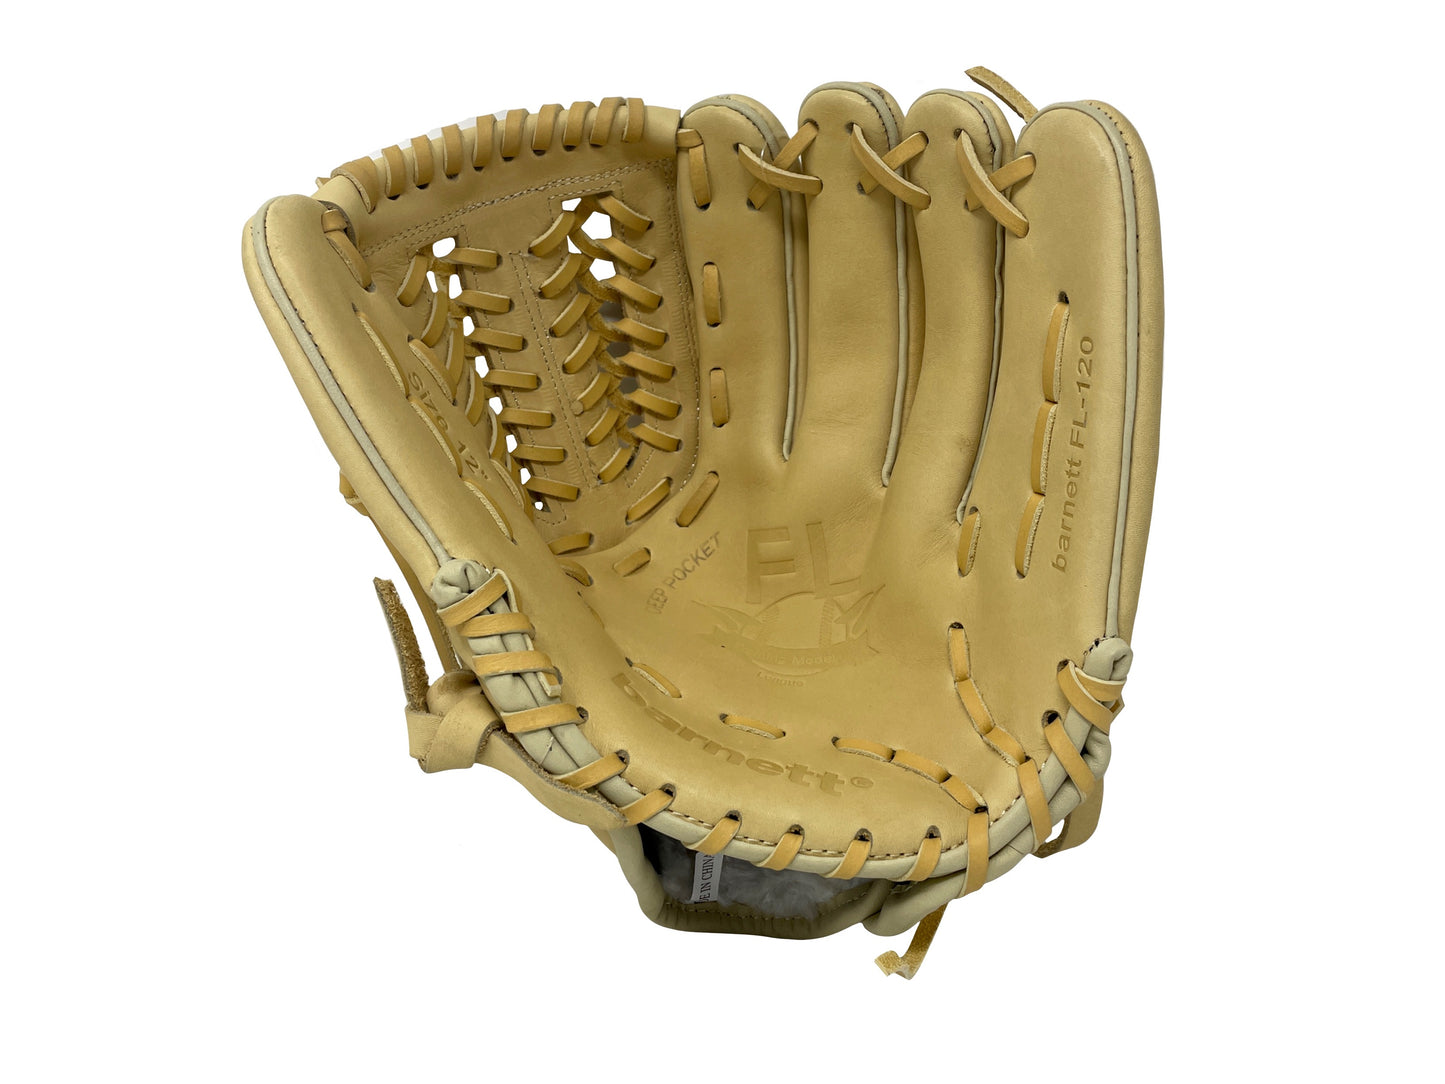 FL-120 High quality, leather baseball glove, infield/outfield / pitcher 12", Beige